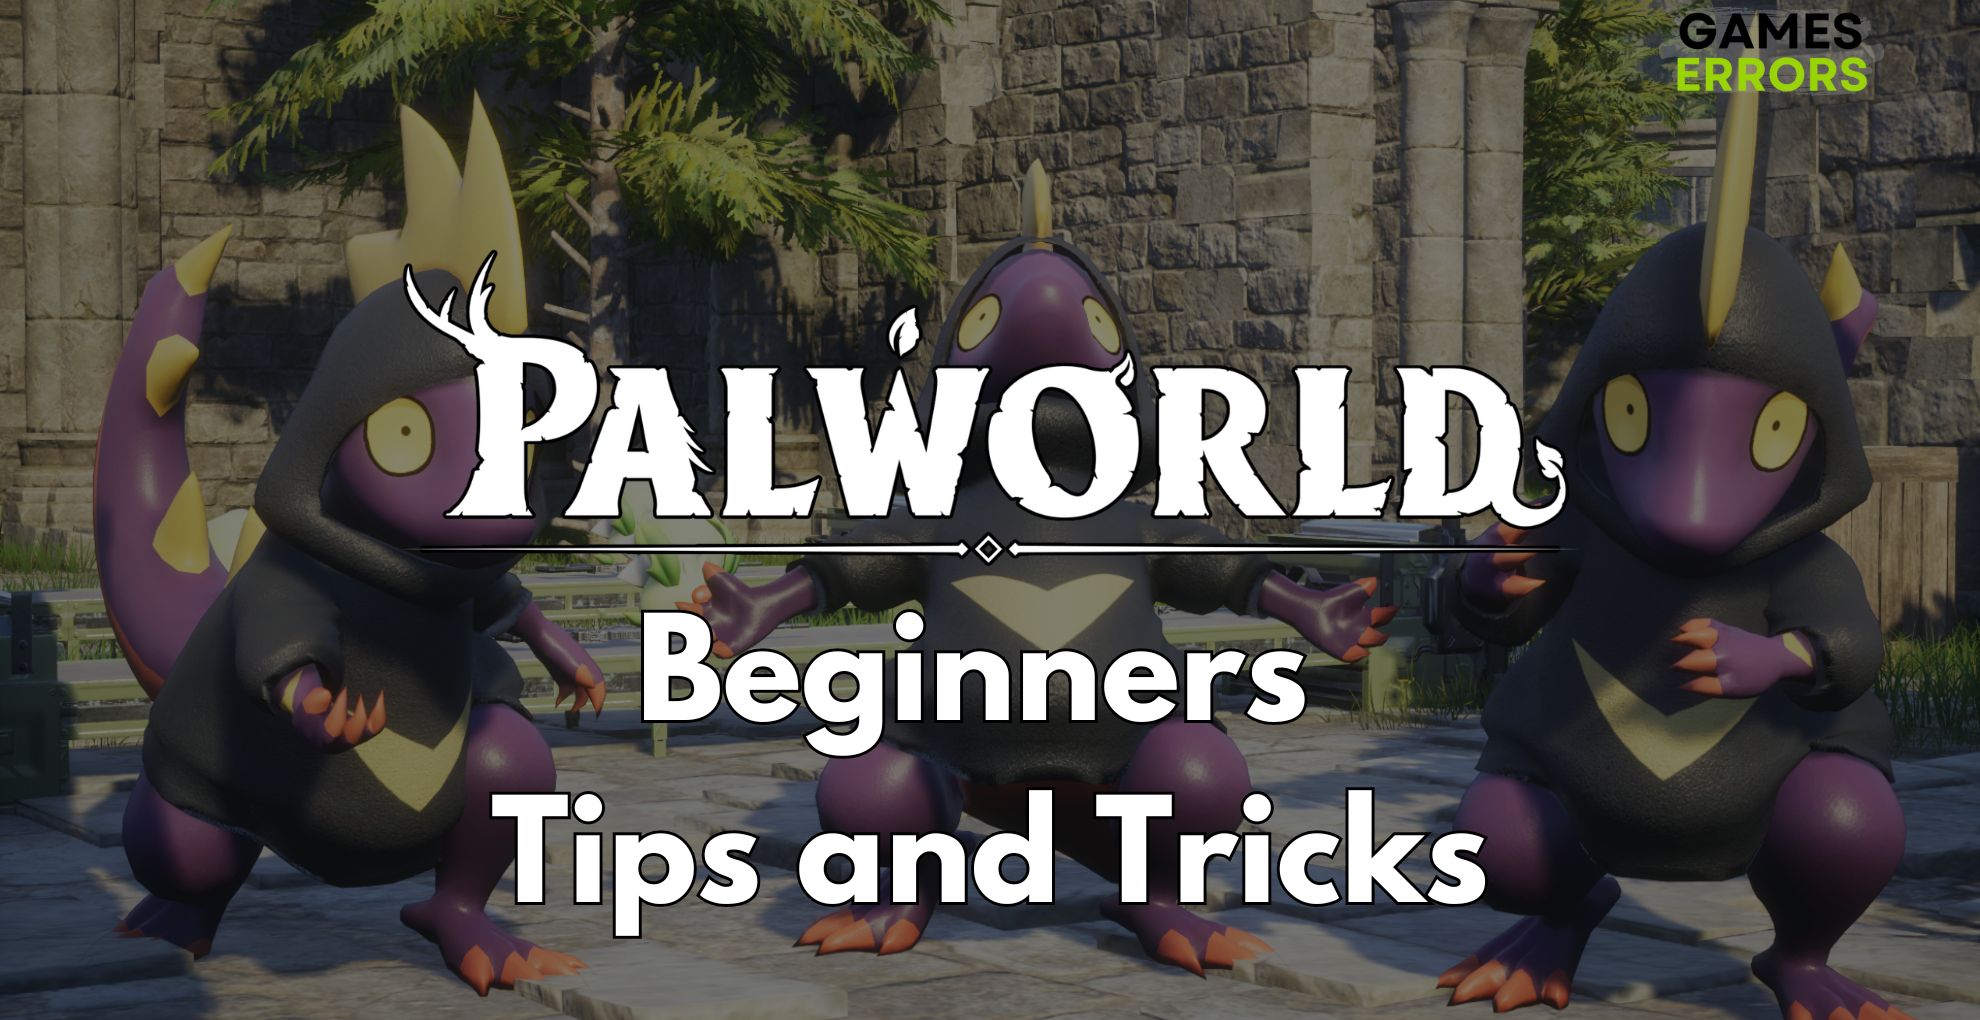 Palworld Beginners Tips and Tricks